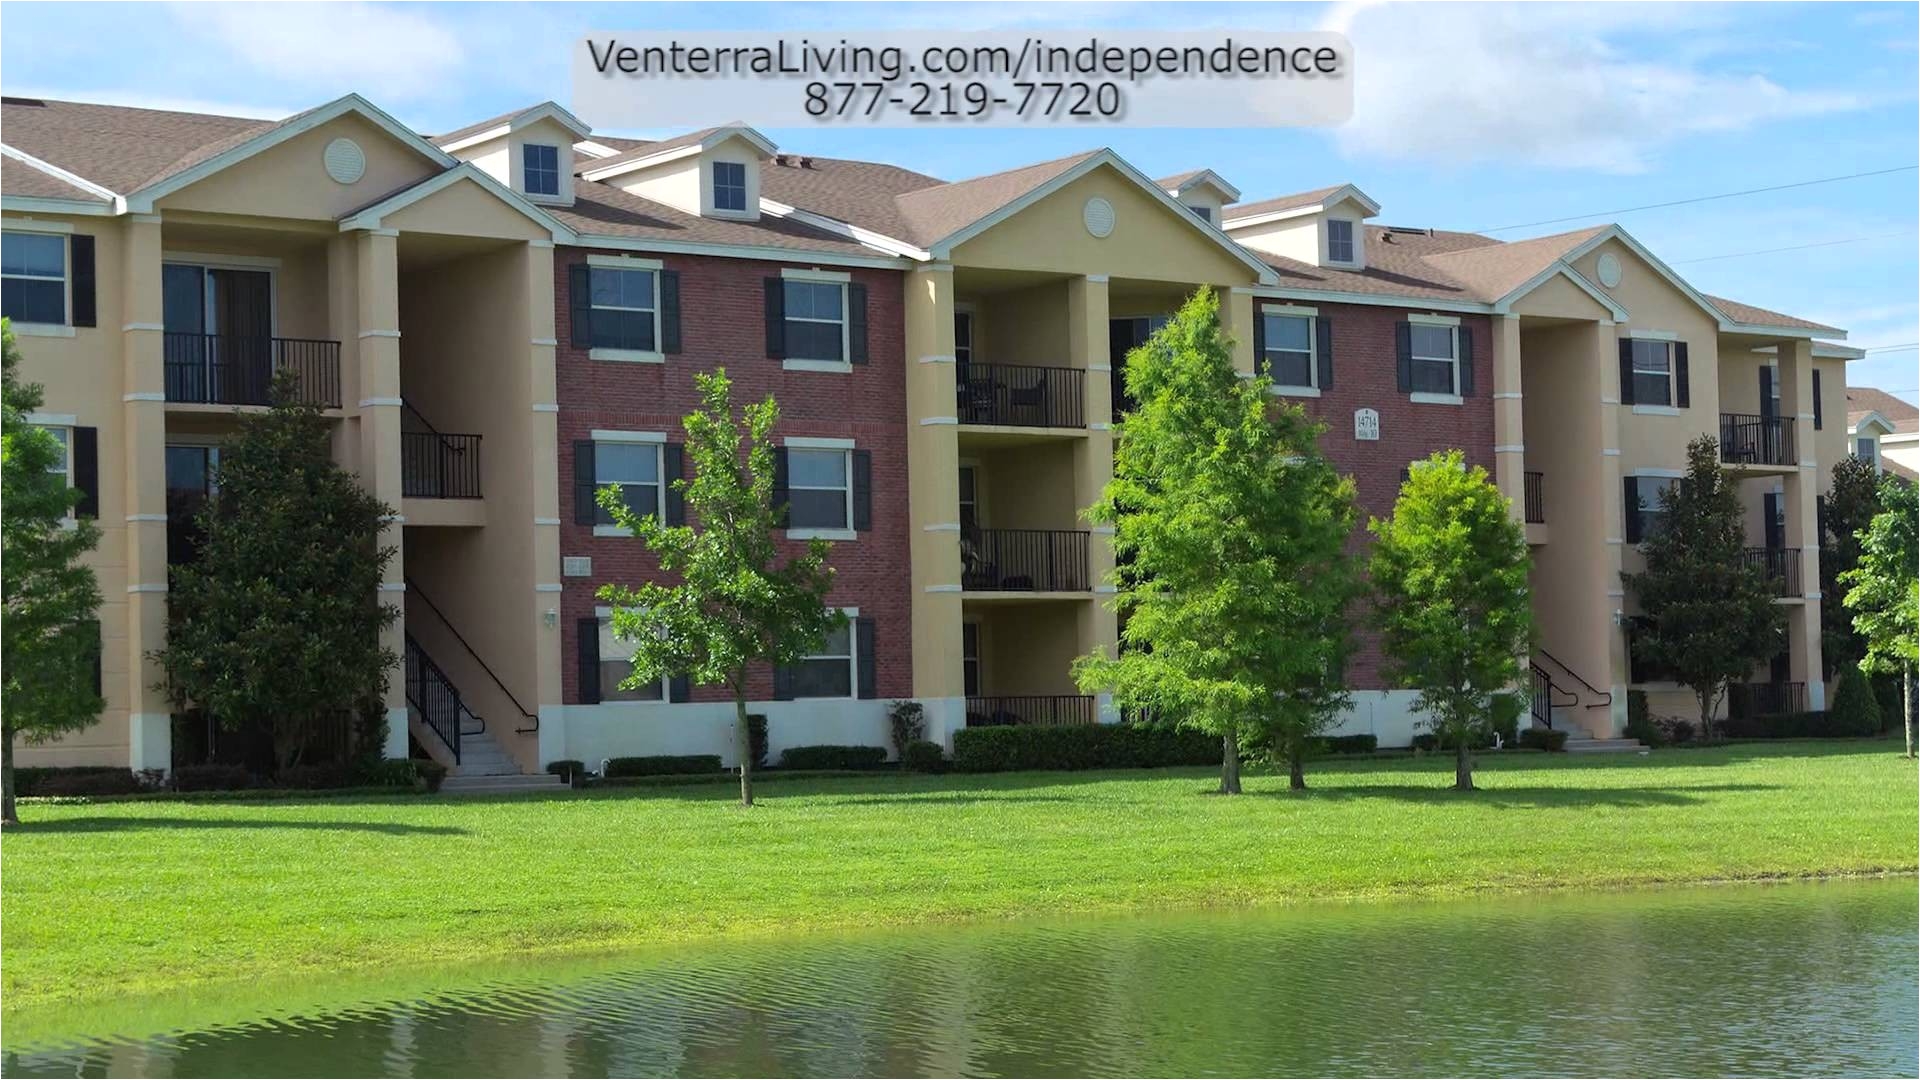 winter garden fl apartments luxury awesome houses for rent in winter garden best image home of